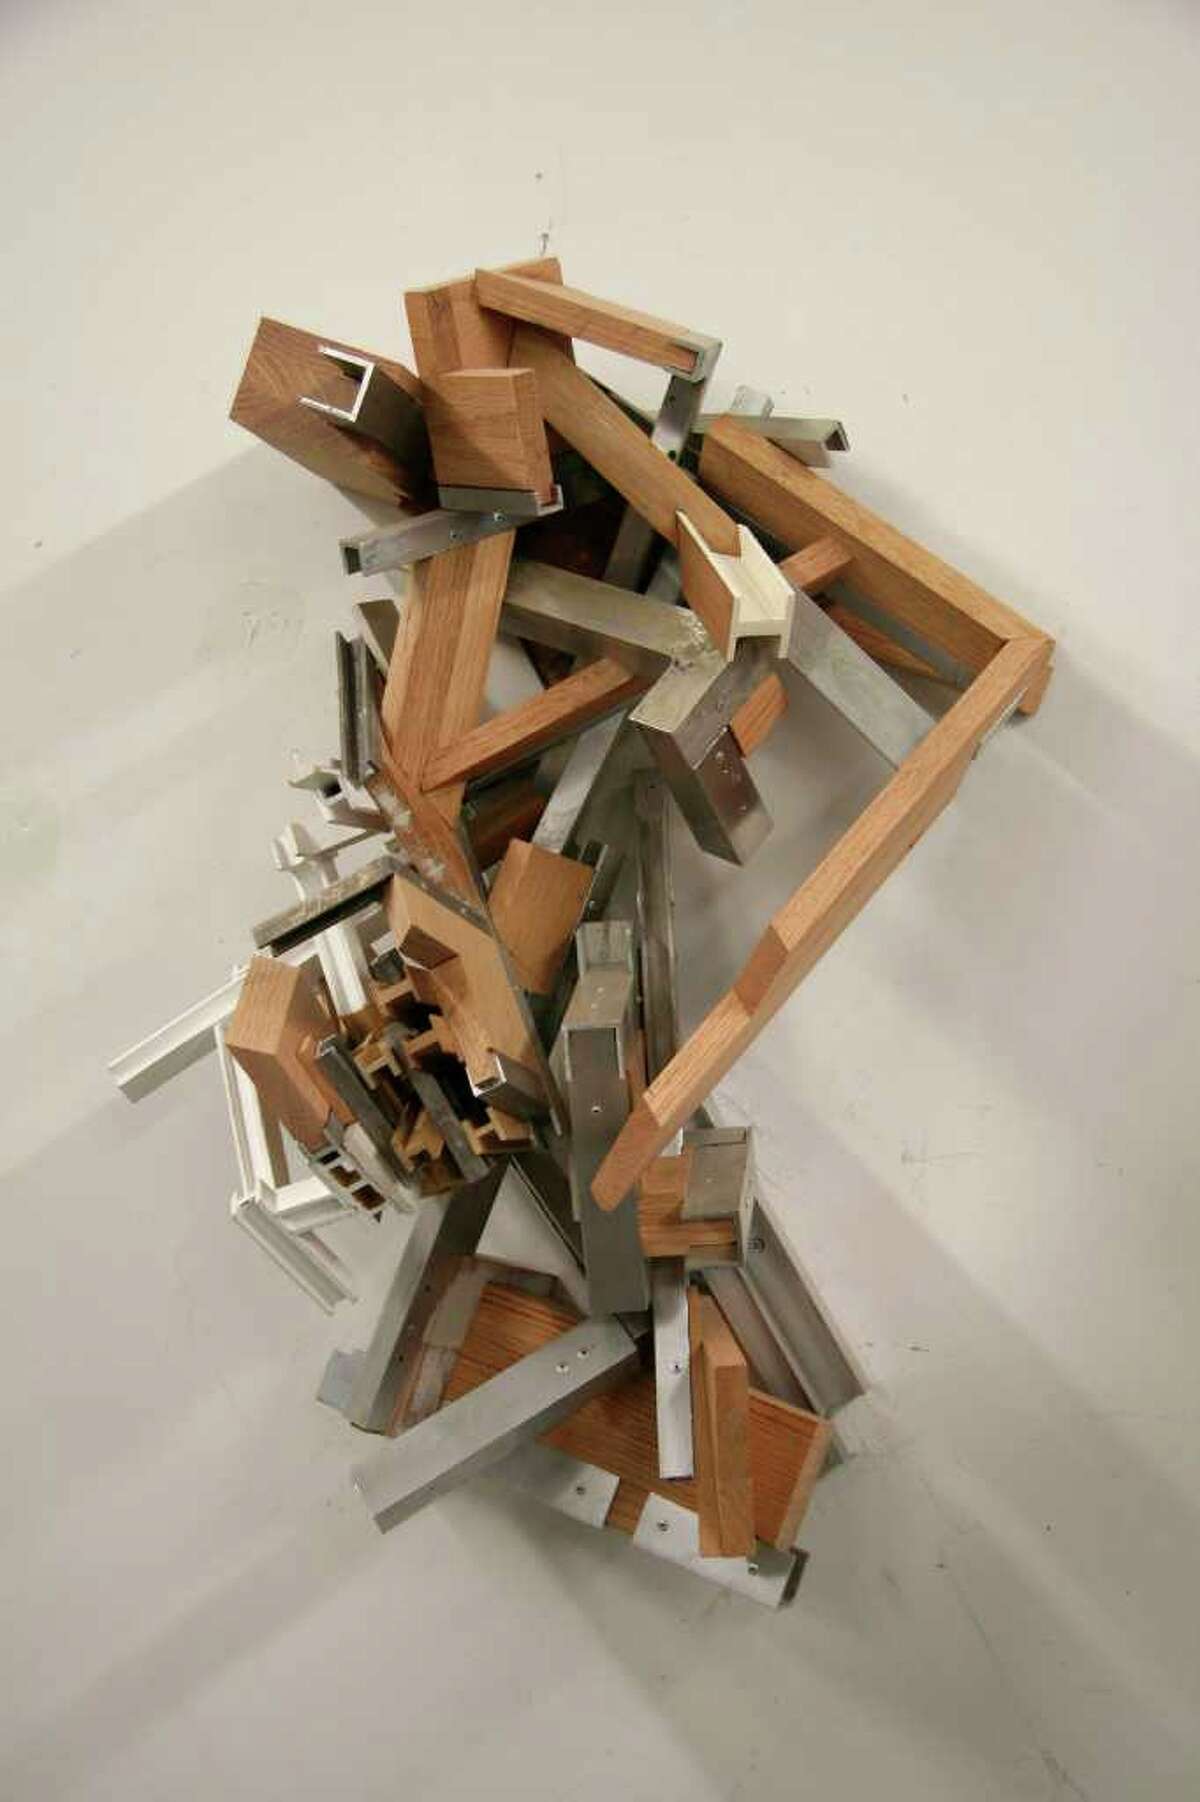 Paul Mauren, a professor of sculpture at The College of Saint Rose, won a Purchase Award for "WC #6, 2011."